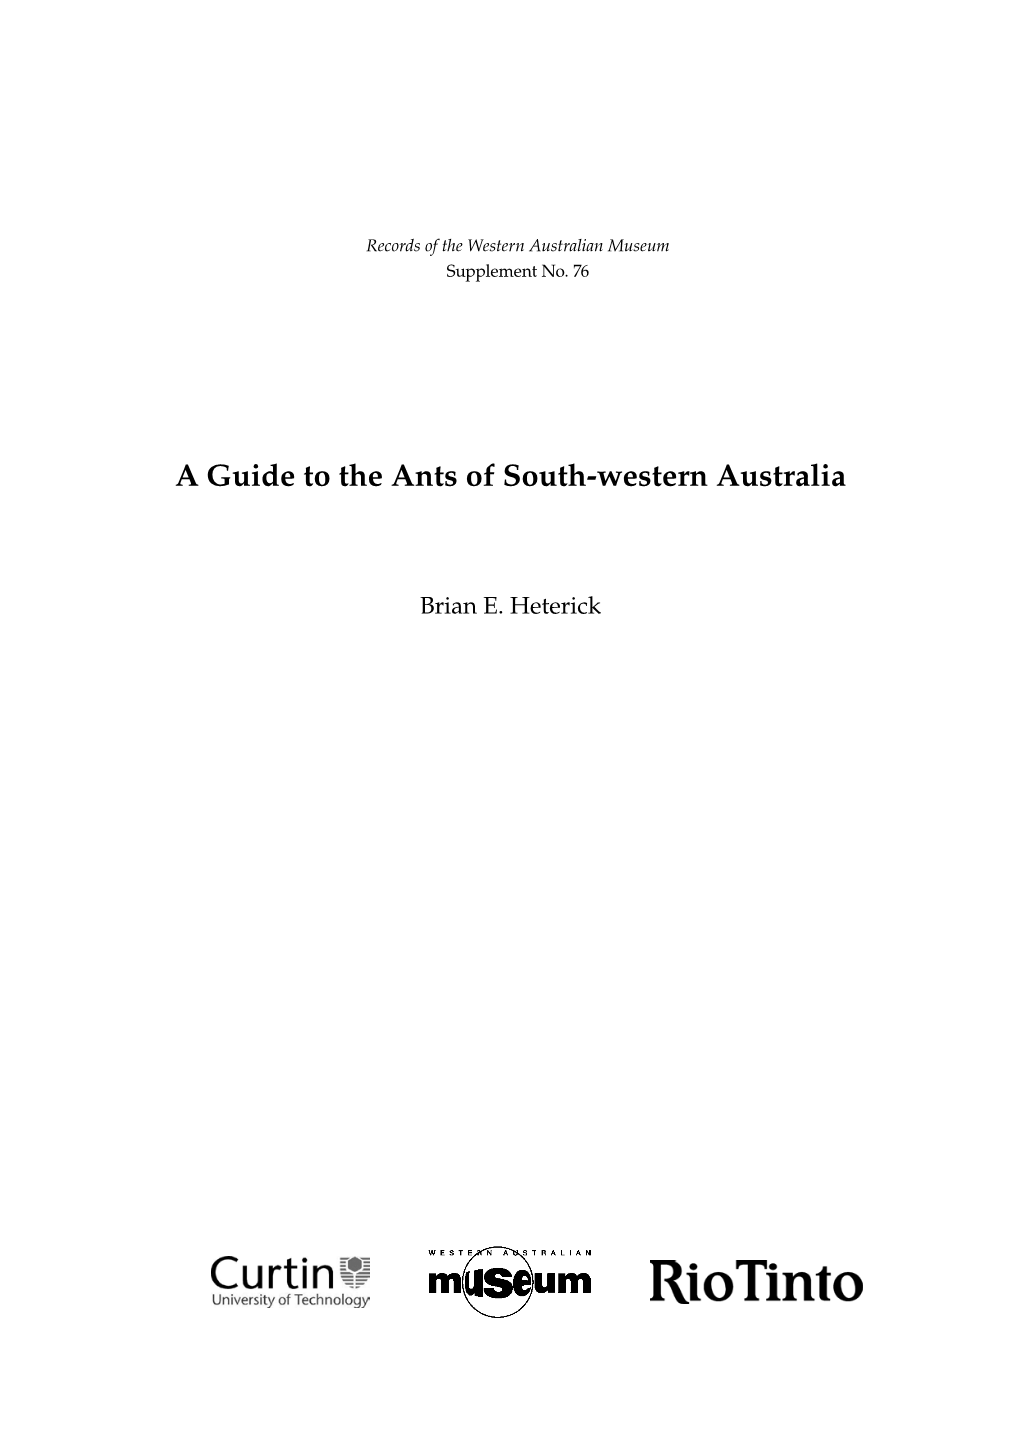 A Guide to the Ants of South-Western Australia